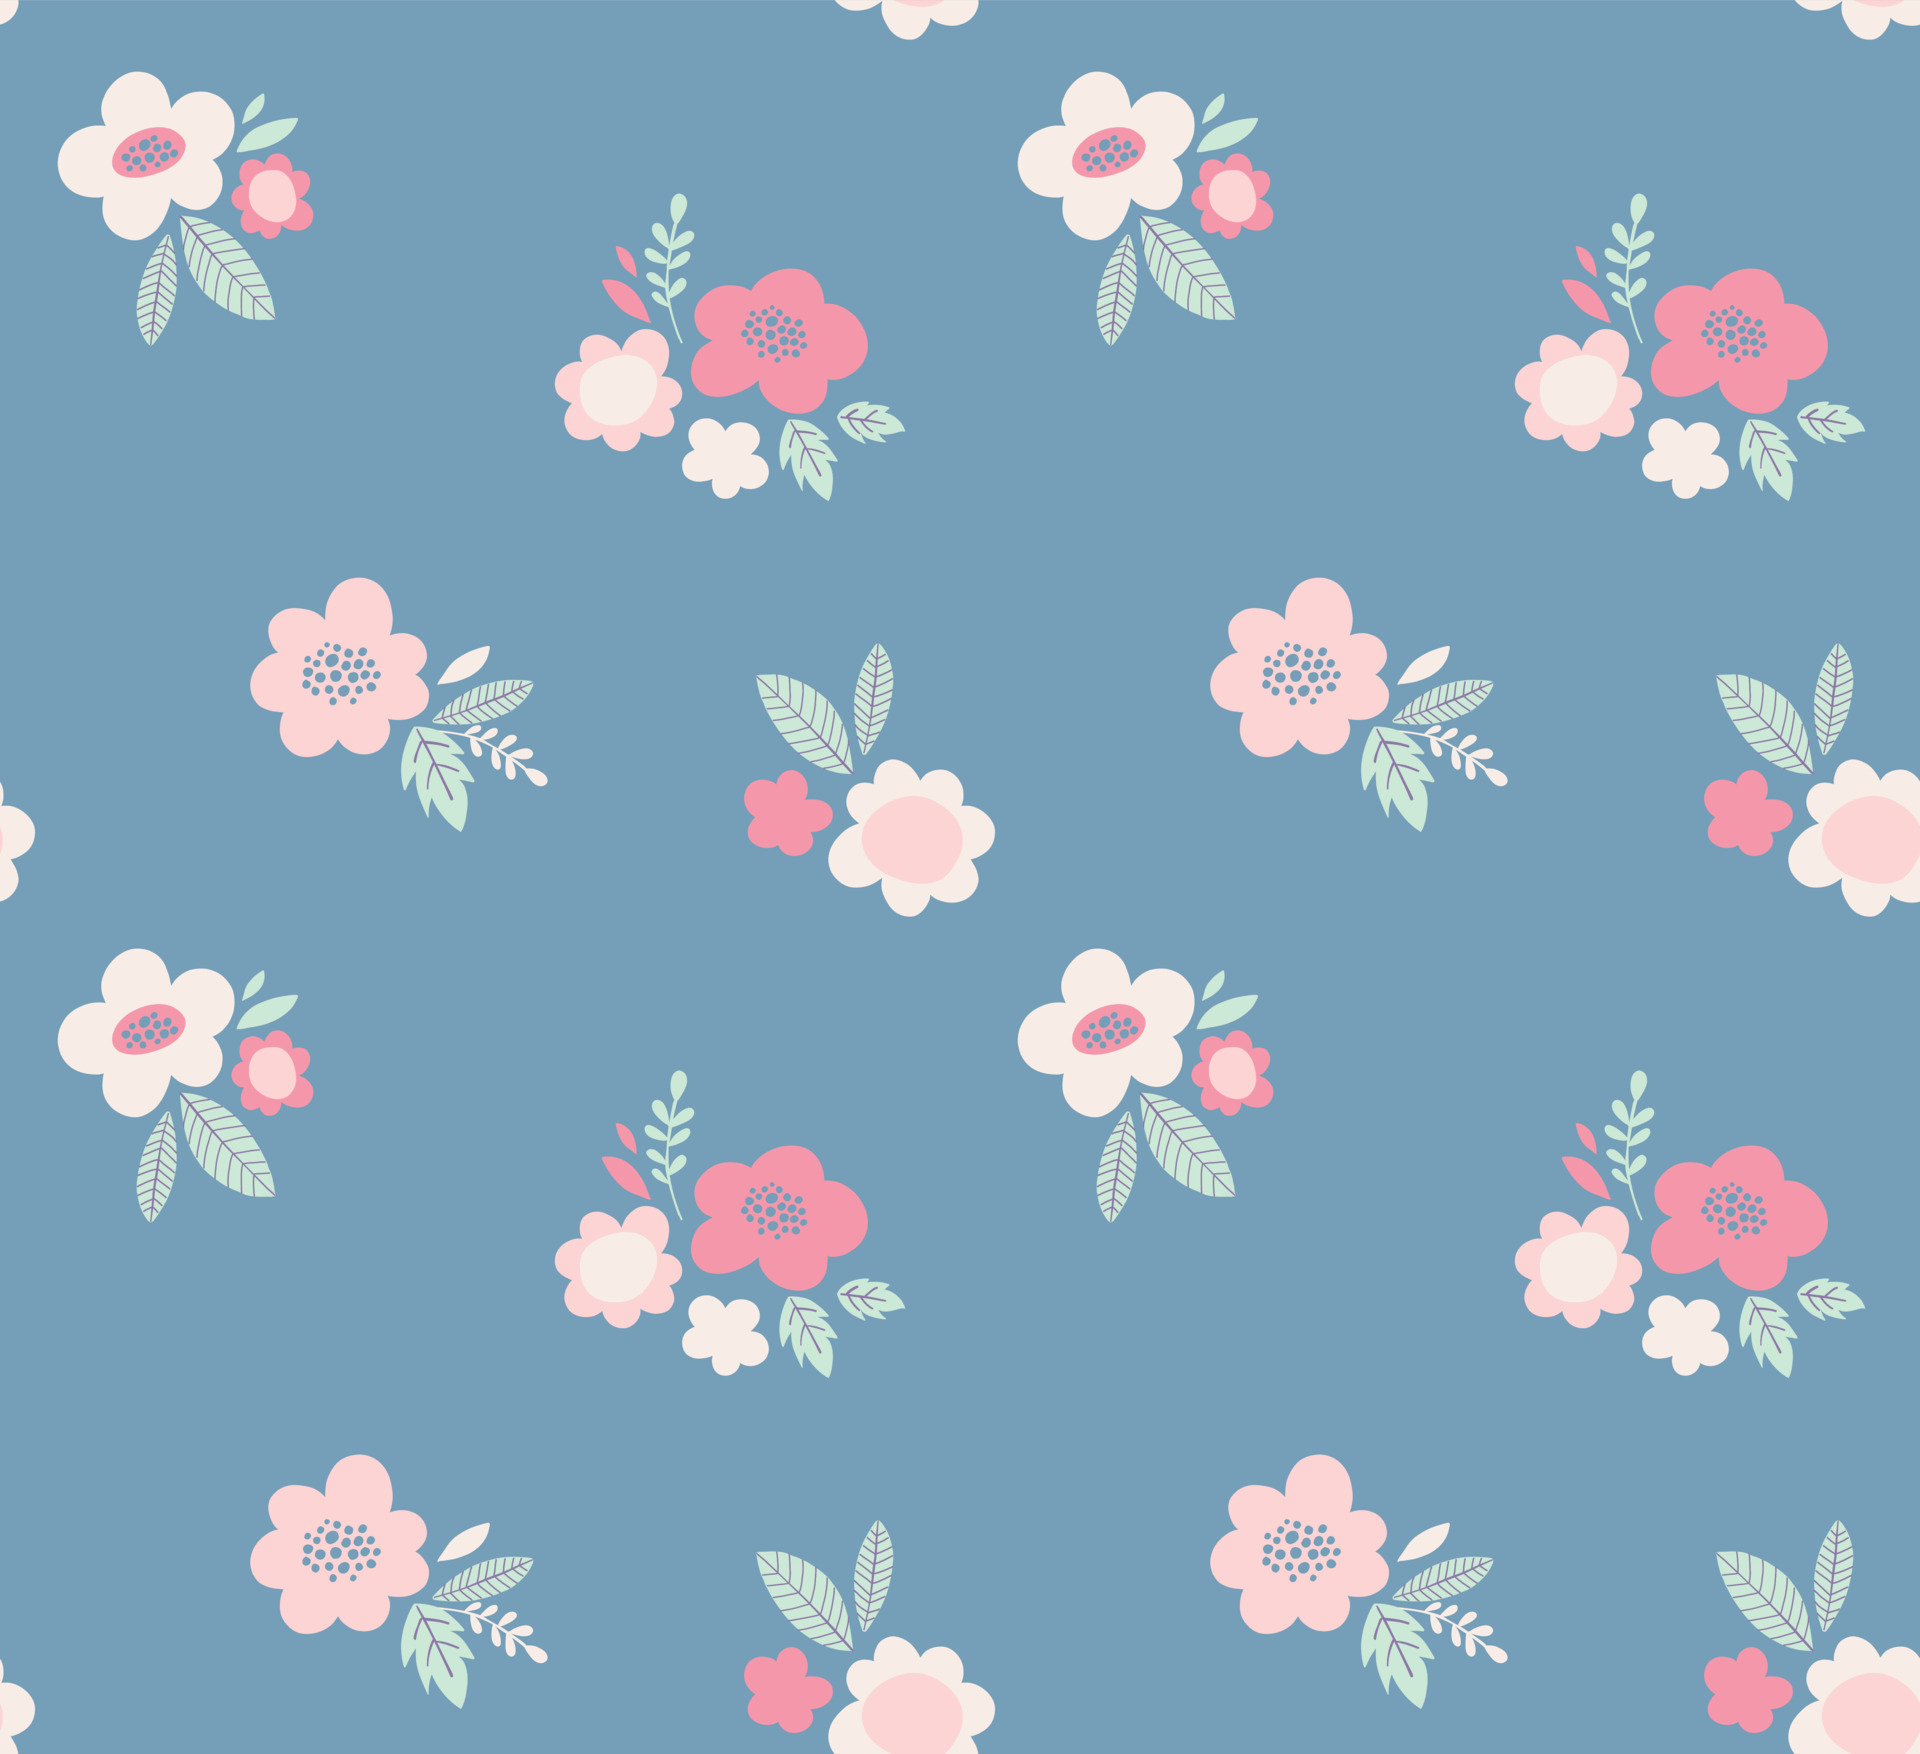 Floral vector pattern. Ditsy flower seamless background. Small